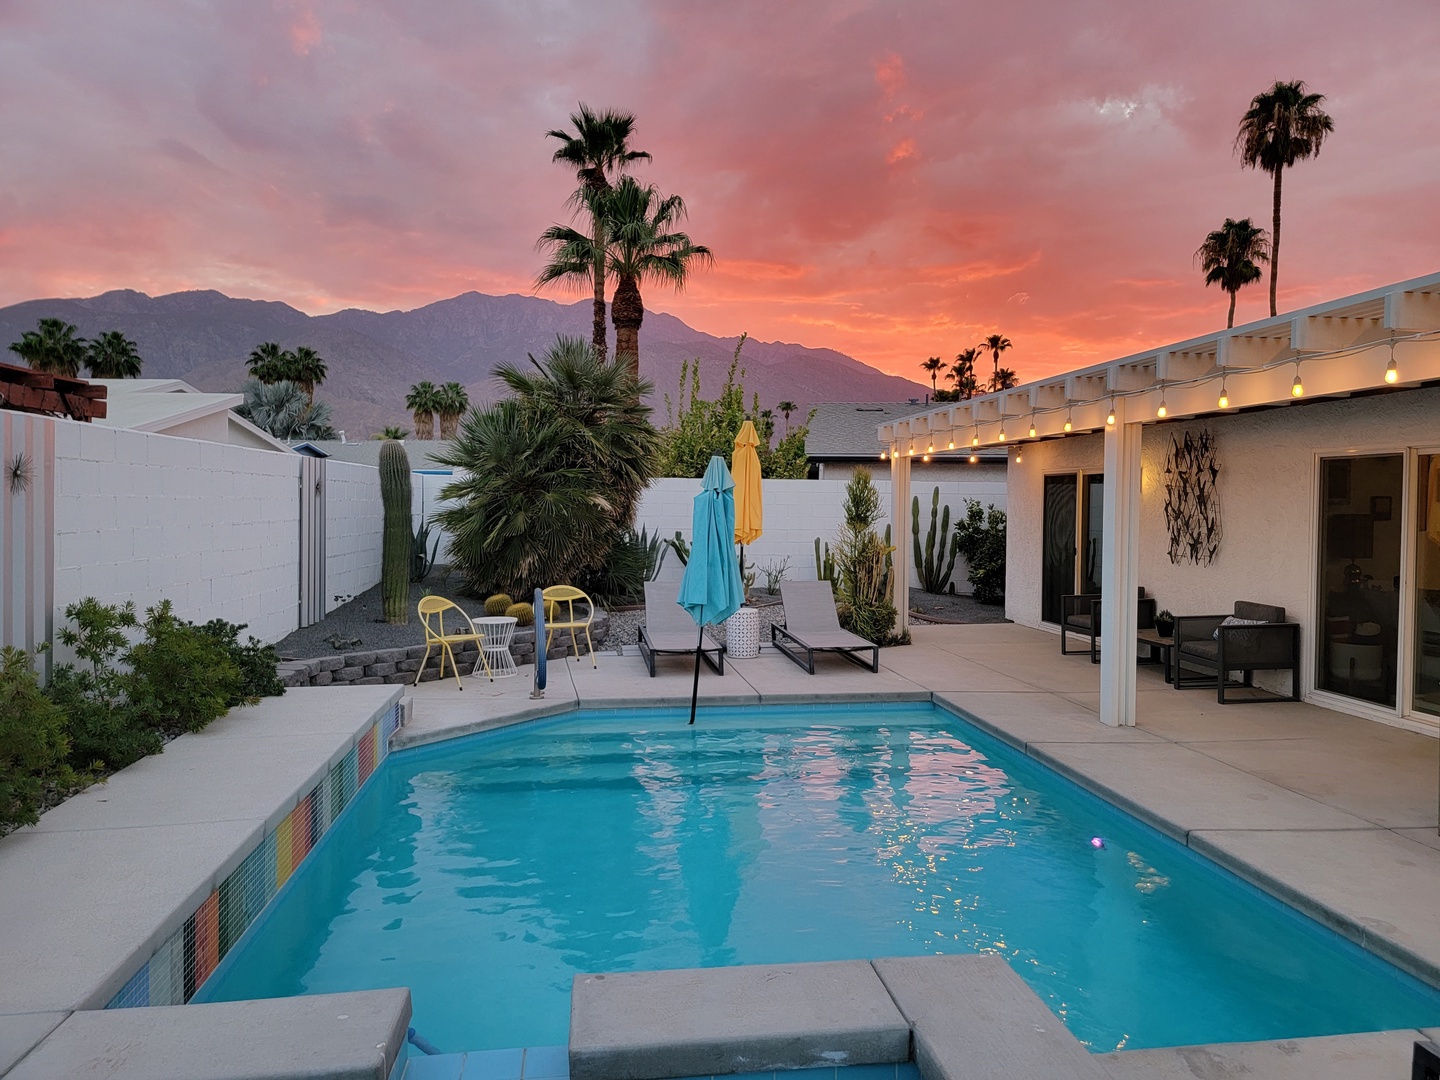 Enjoy your evenings by the pool with stunning mountain sunsets